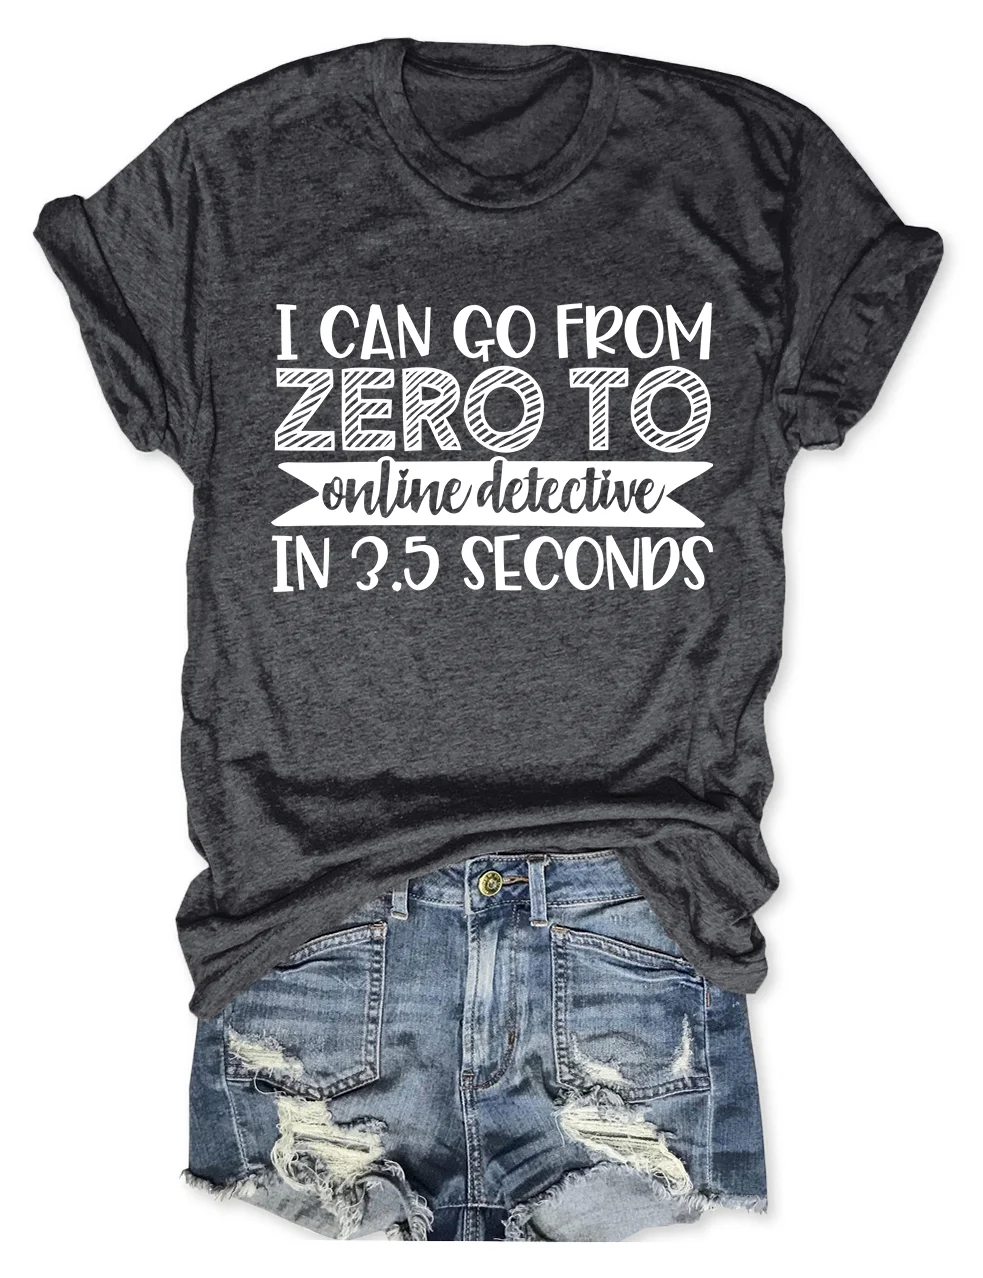 I Can Go From Zero To Online Detective In 3.5 Seconds T-Shirt